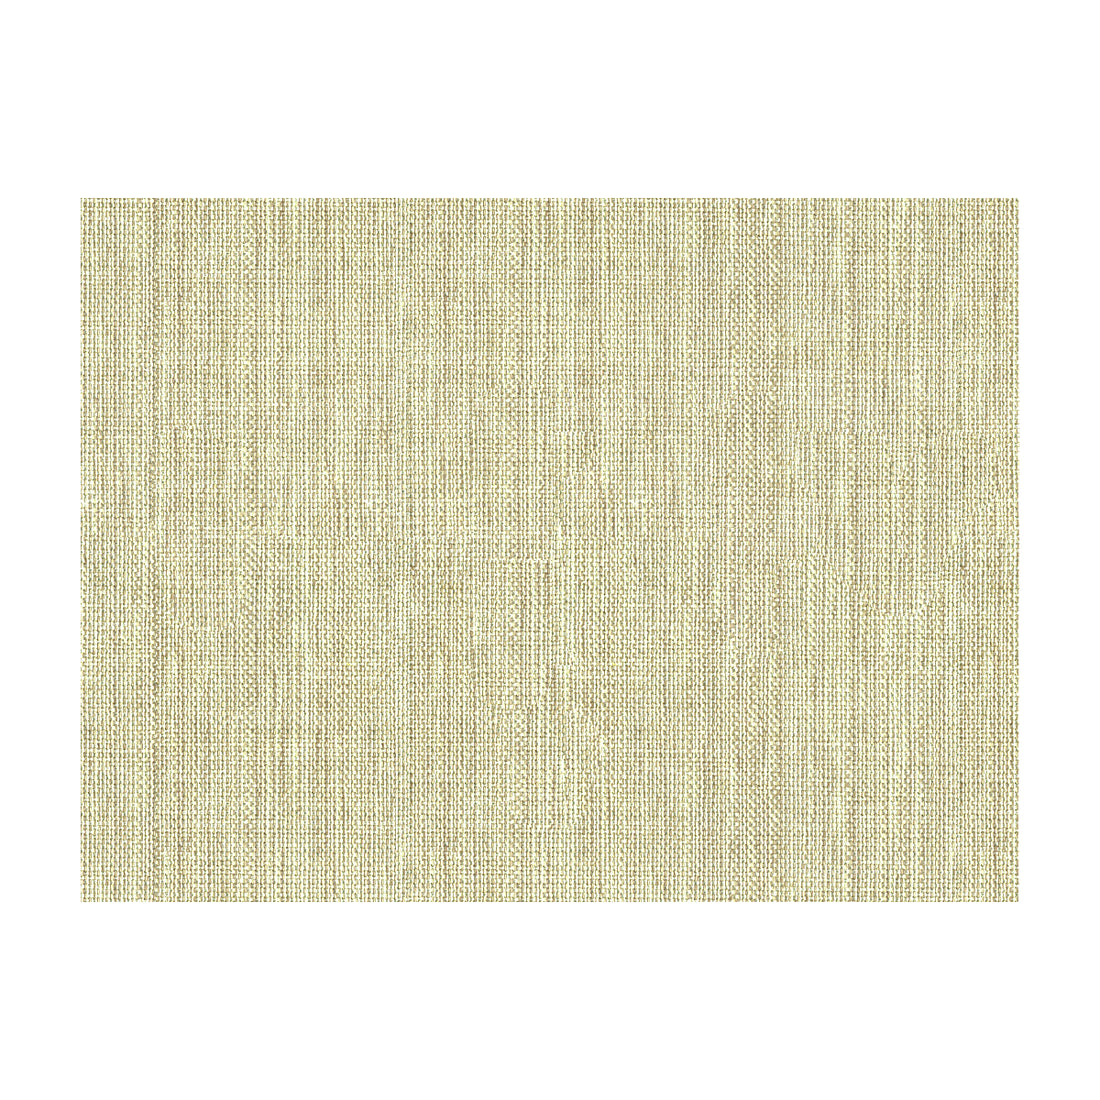 Sequoia fabric in sand color - pattern 34174.161.0 - by Kravet Design in the Candice Olson collection